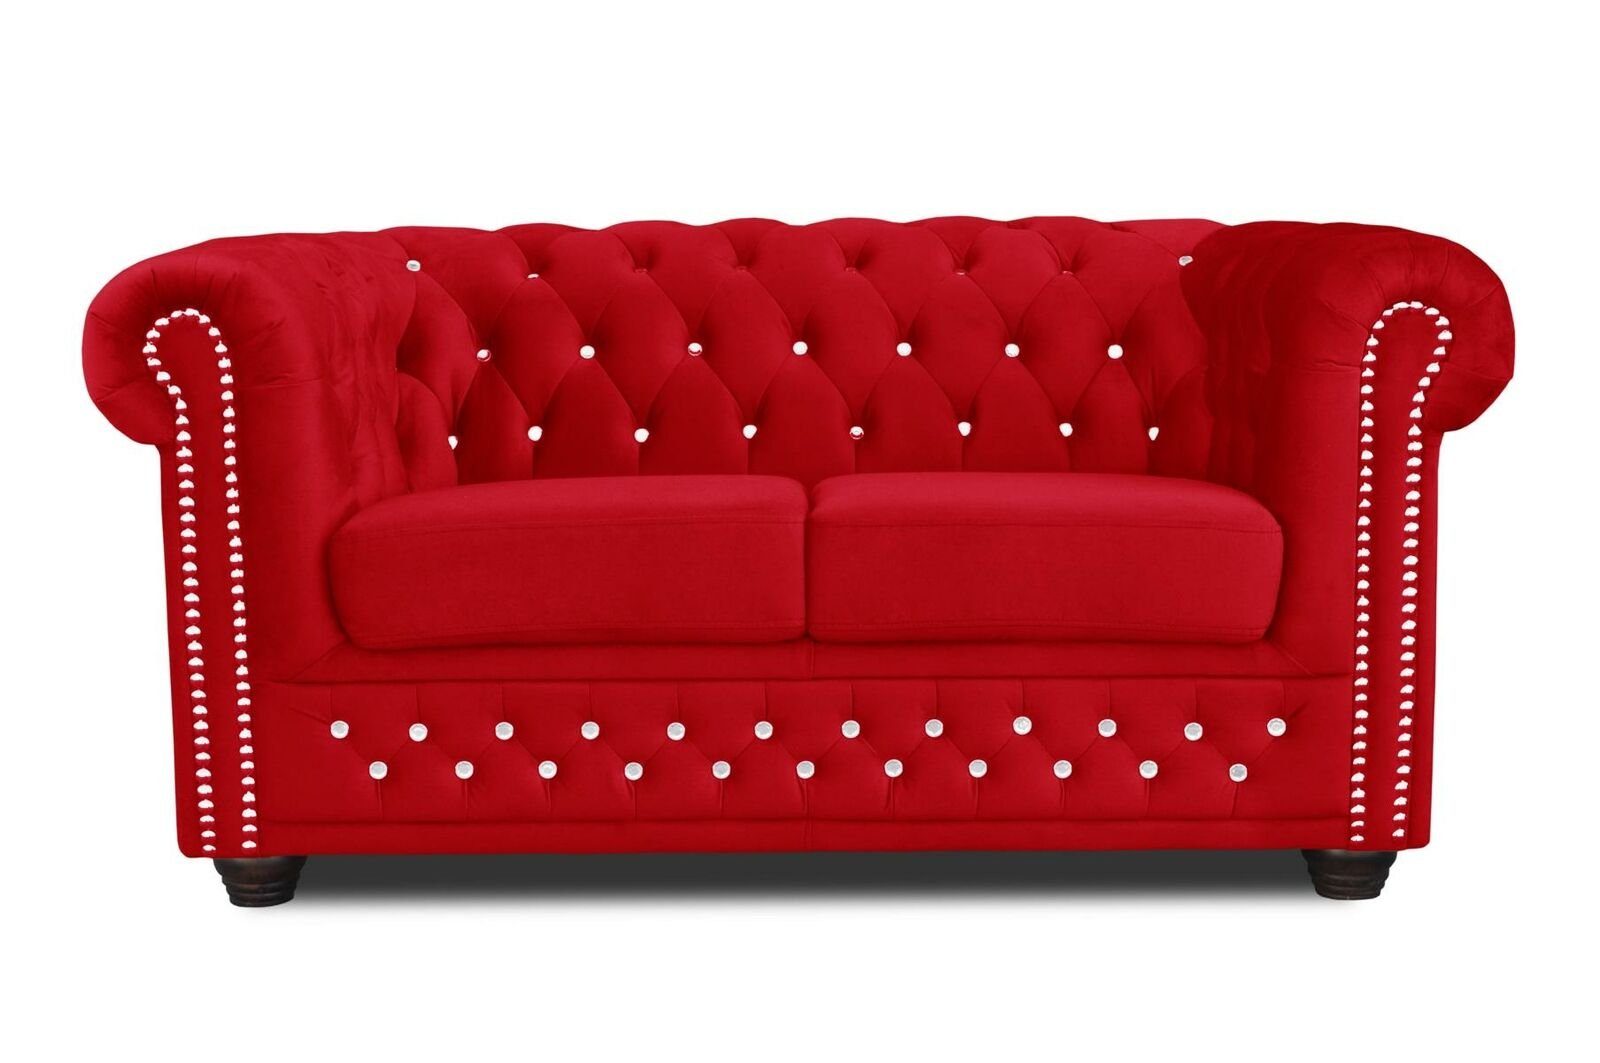 JVmoebel Sofa Roter Chesterfield Zweisitzer Textil Couch Polster Stoff Sofas, Made in Europe